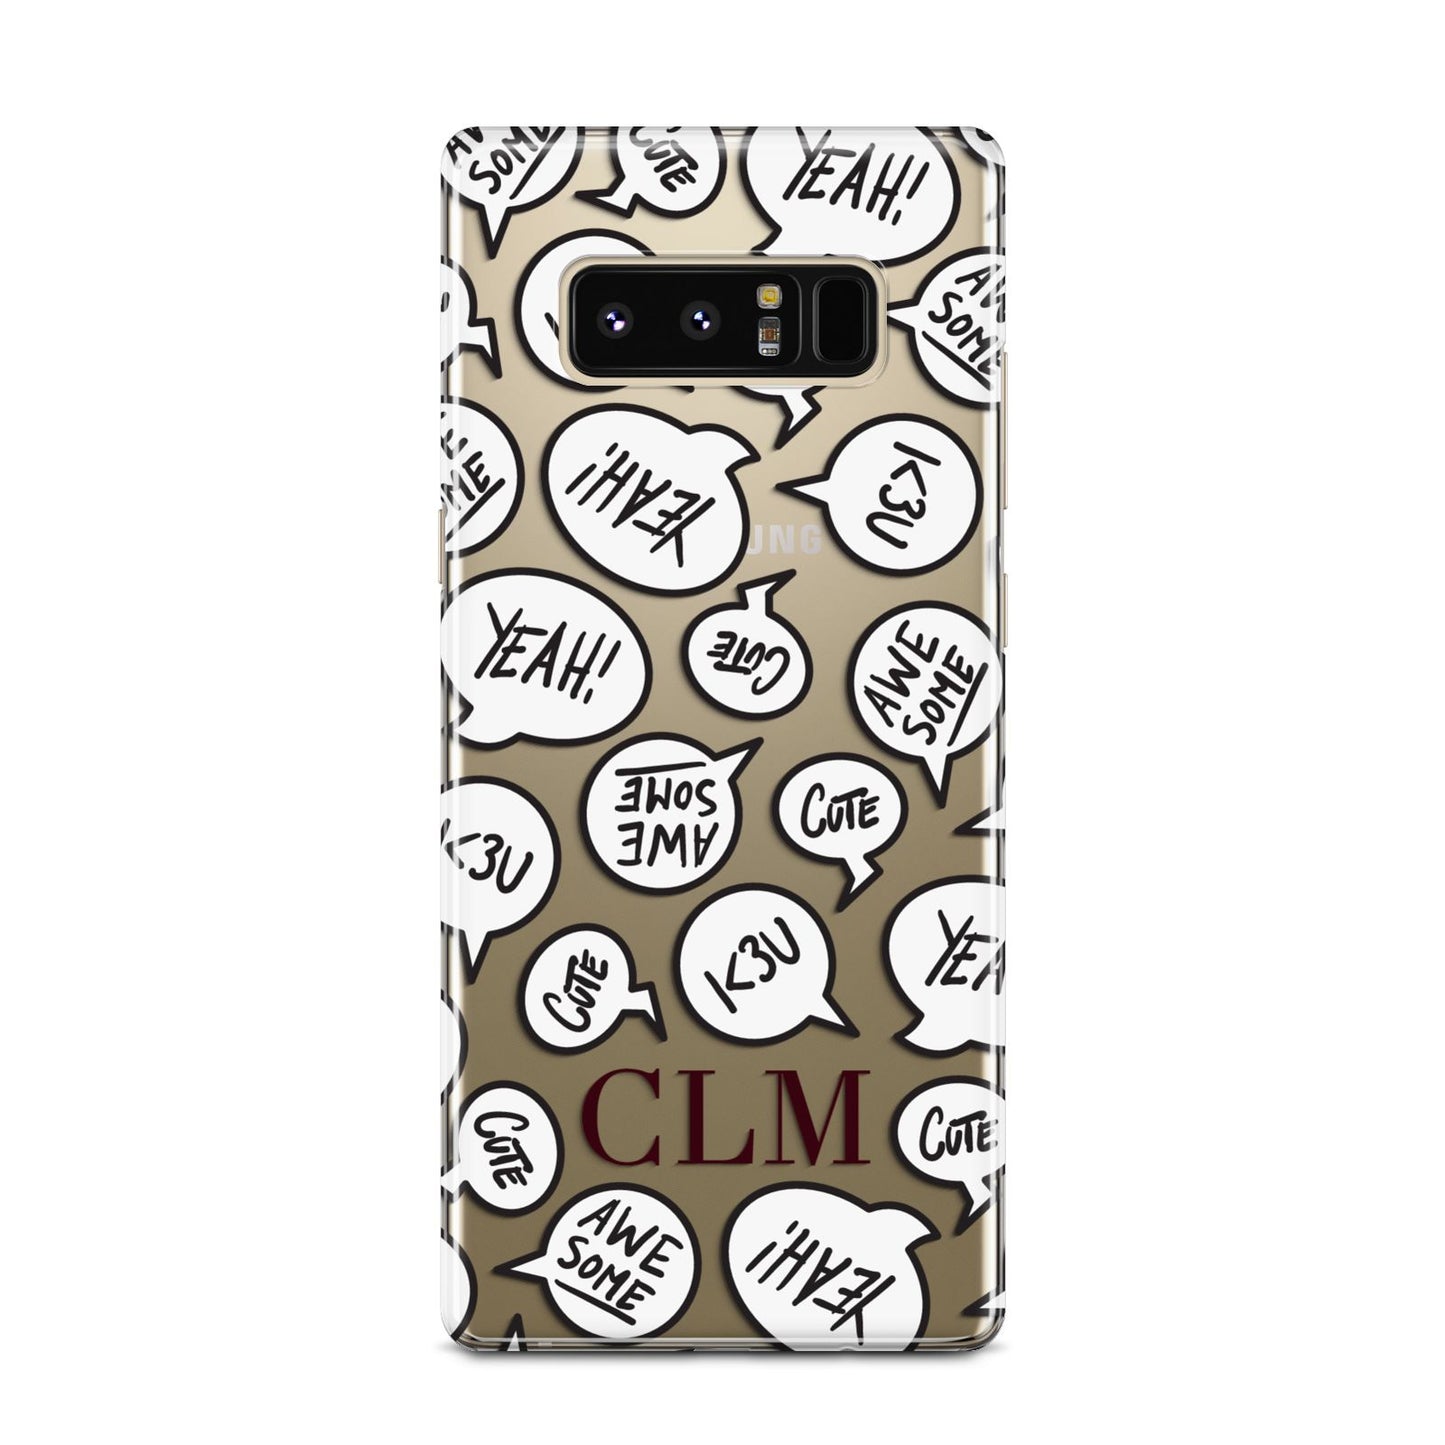 Personalised Sayings With Initials Samsung Galaxy Note 8 Case